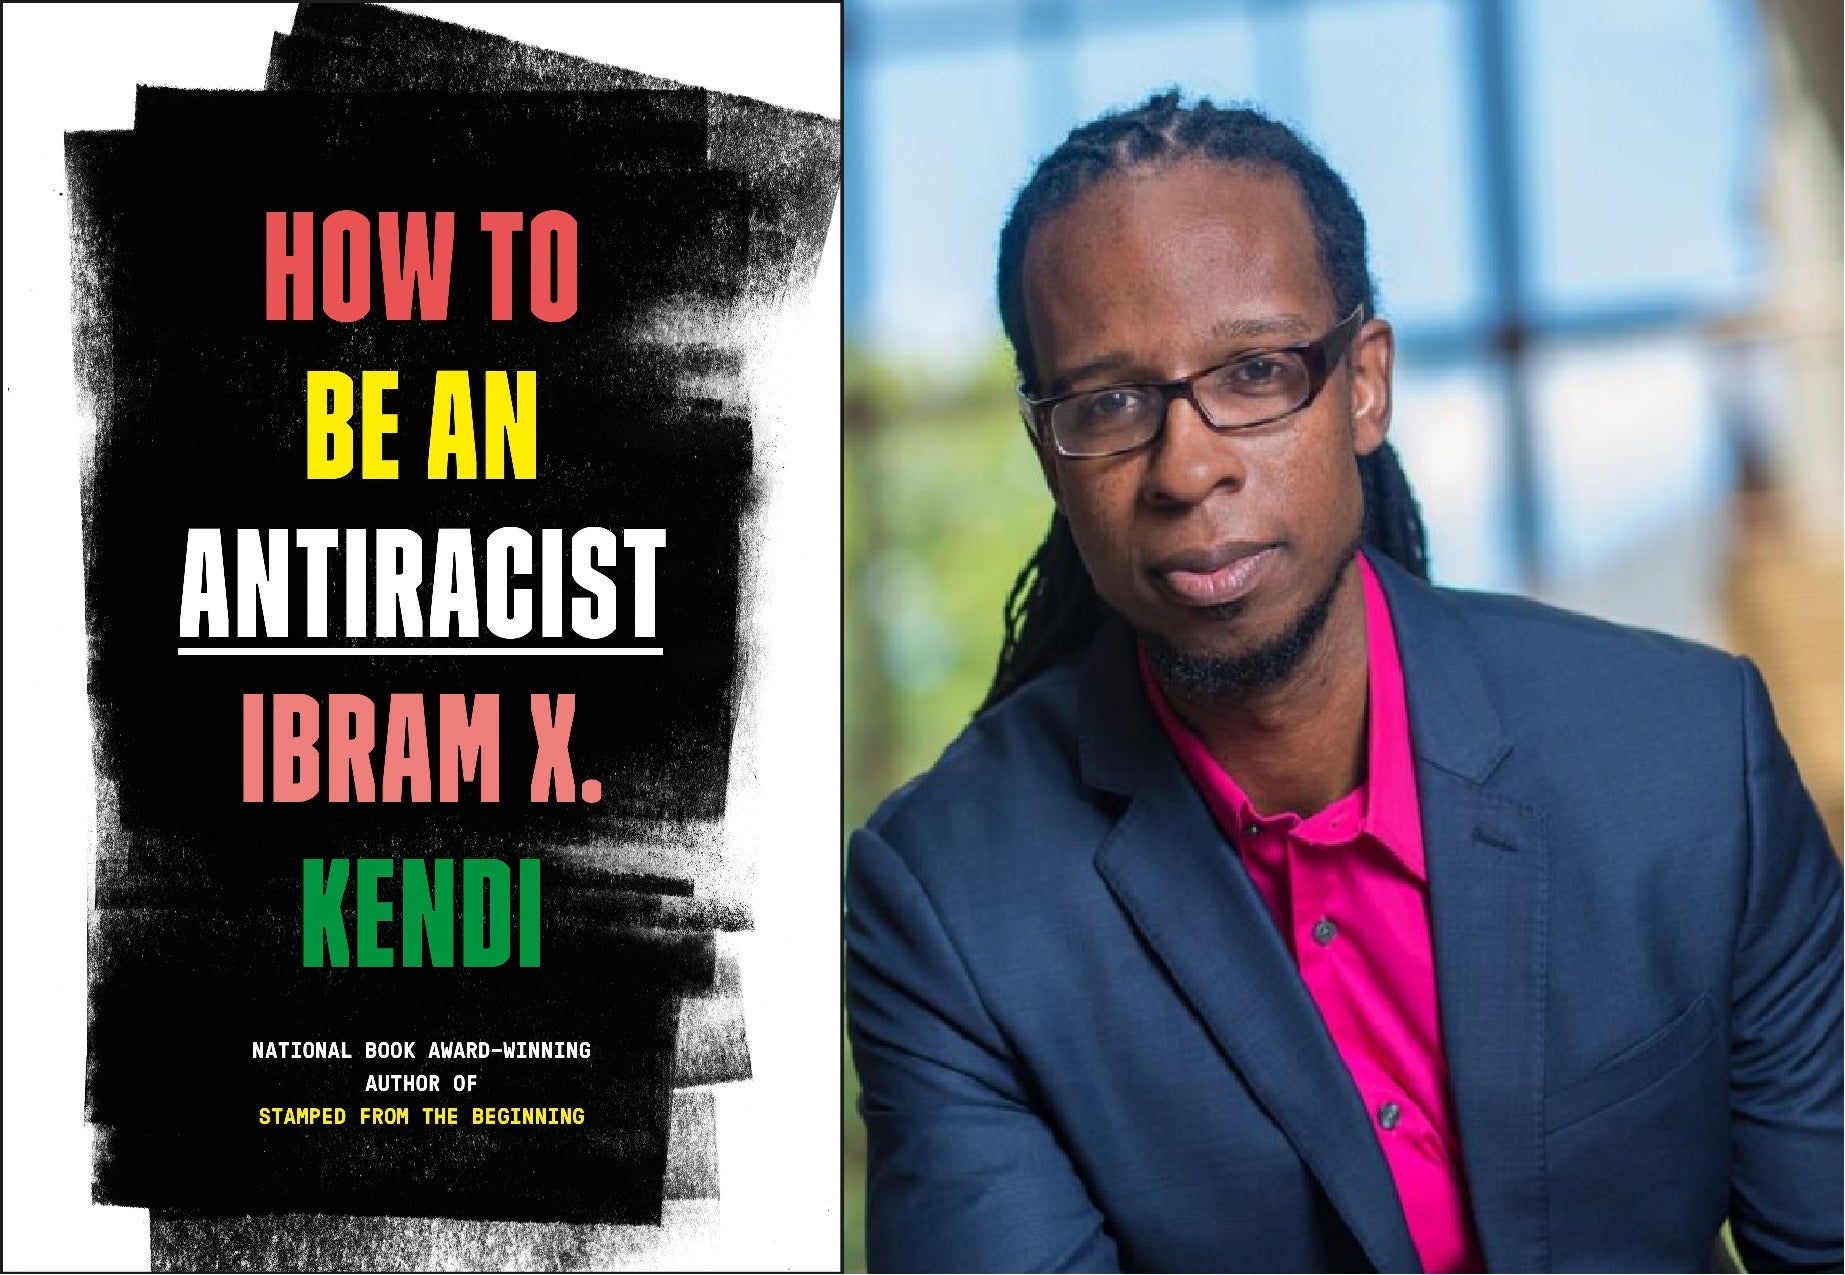 Book Talk with Ibram X. Kendi on “How to Be an Antiracist”